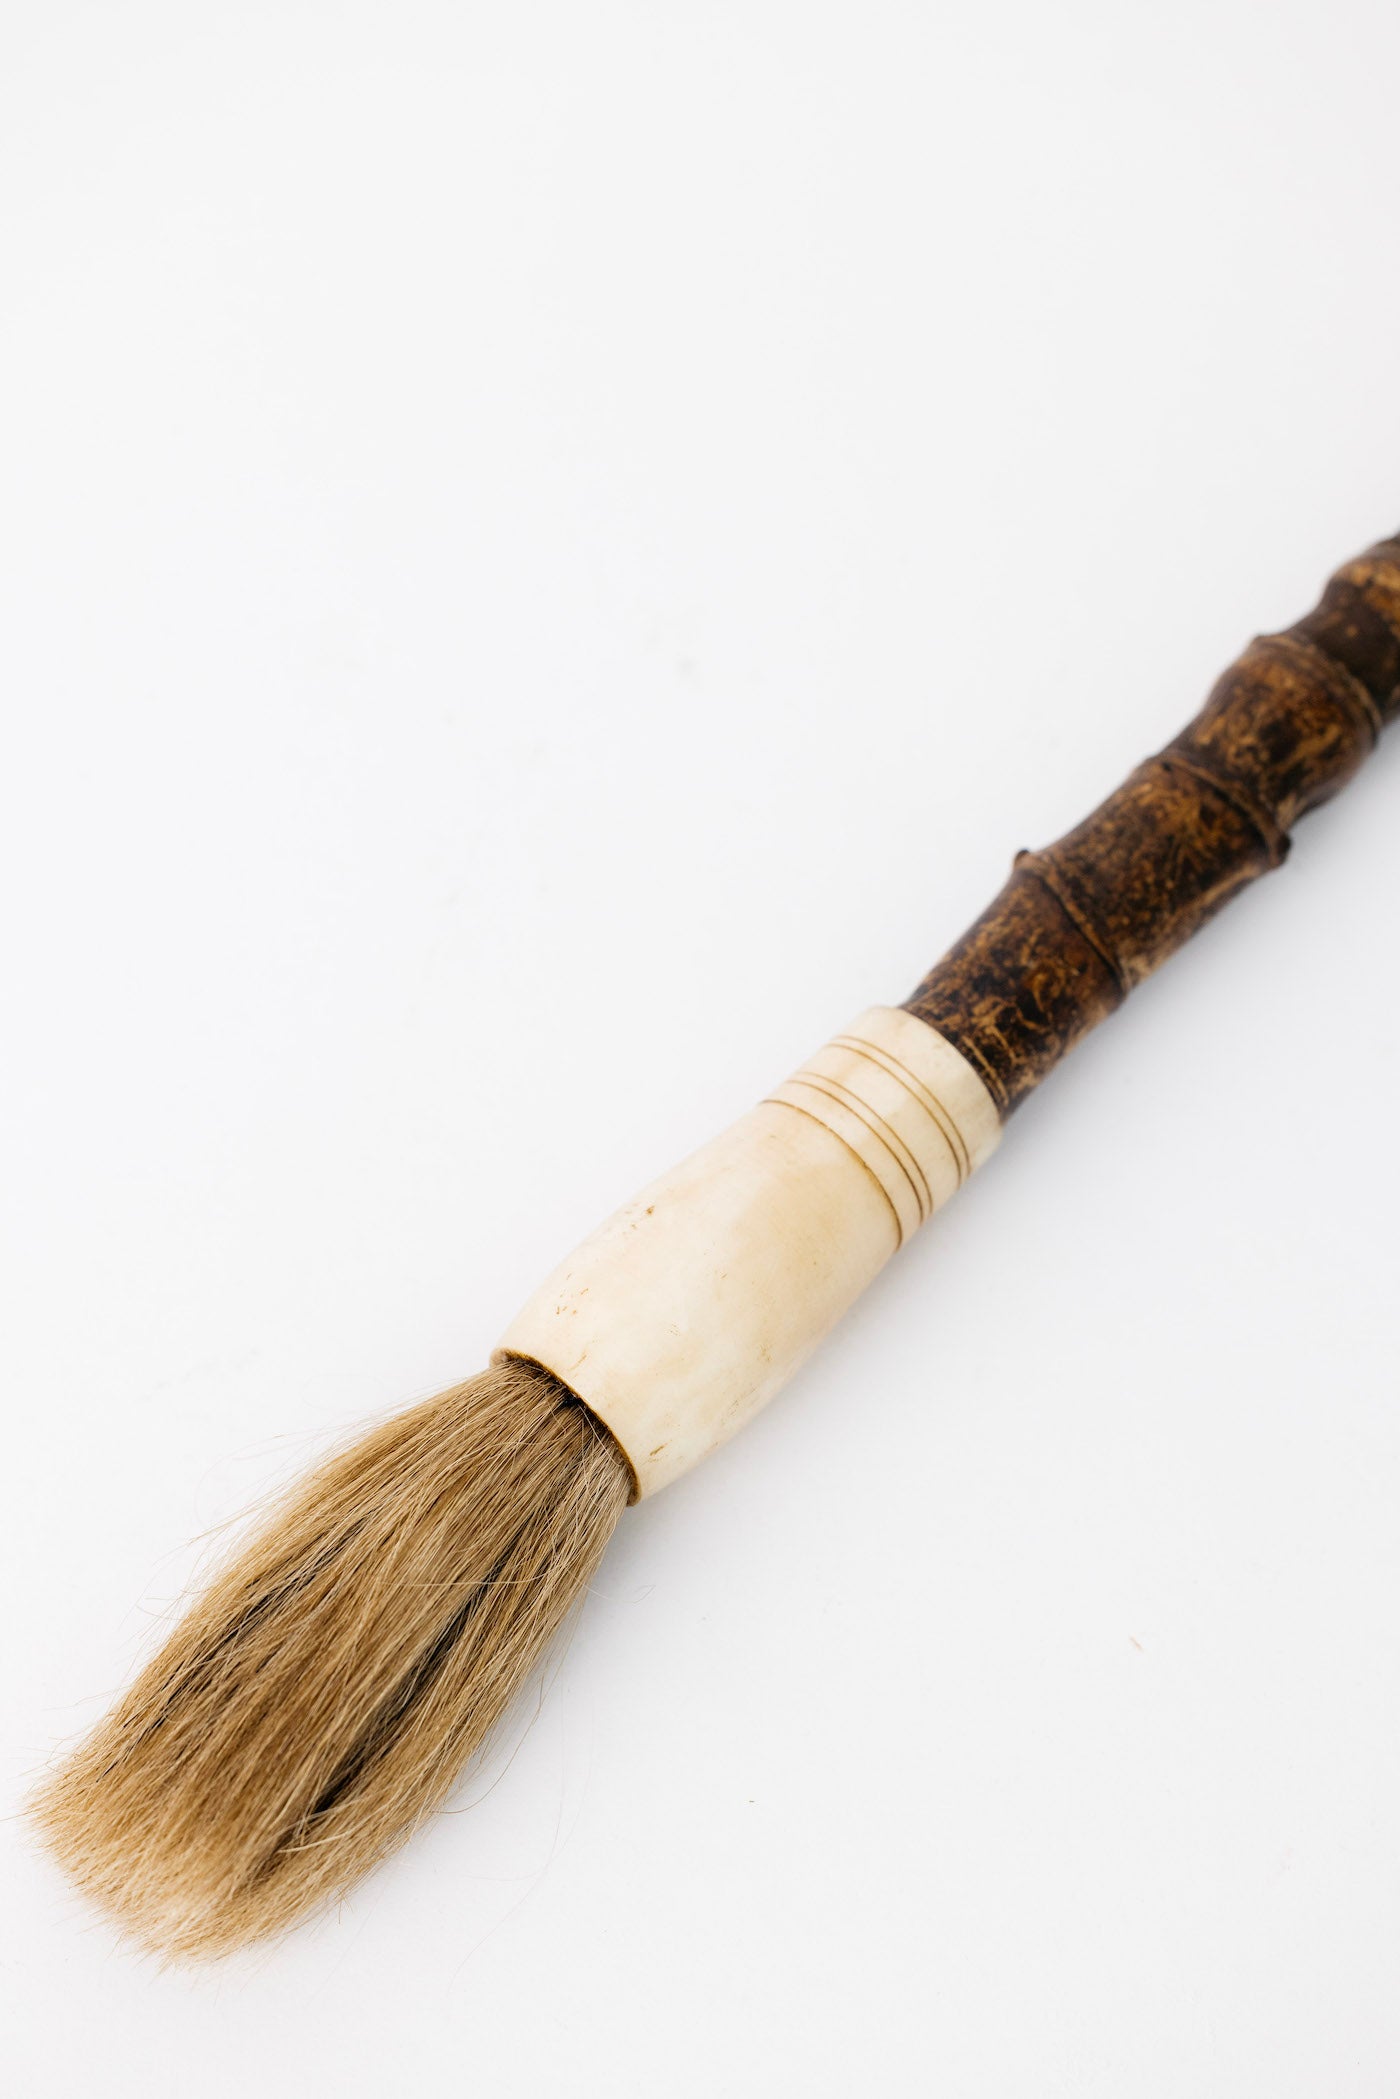 Imperial Calligraphy Brush - Wood